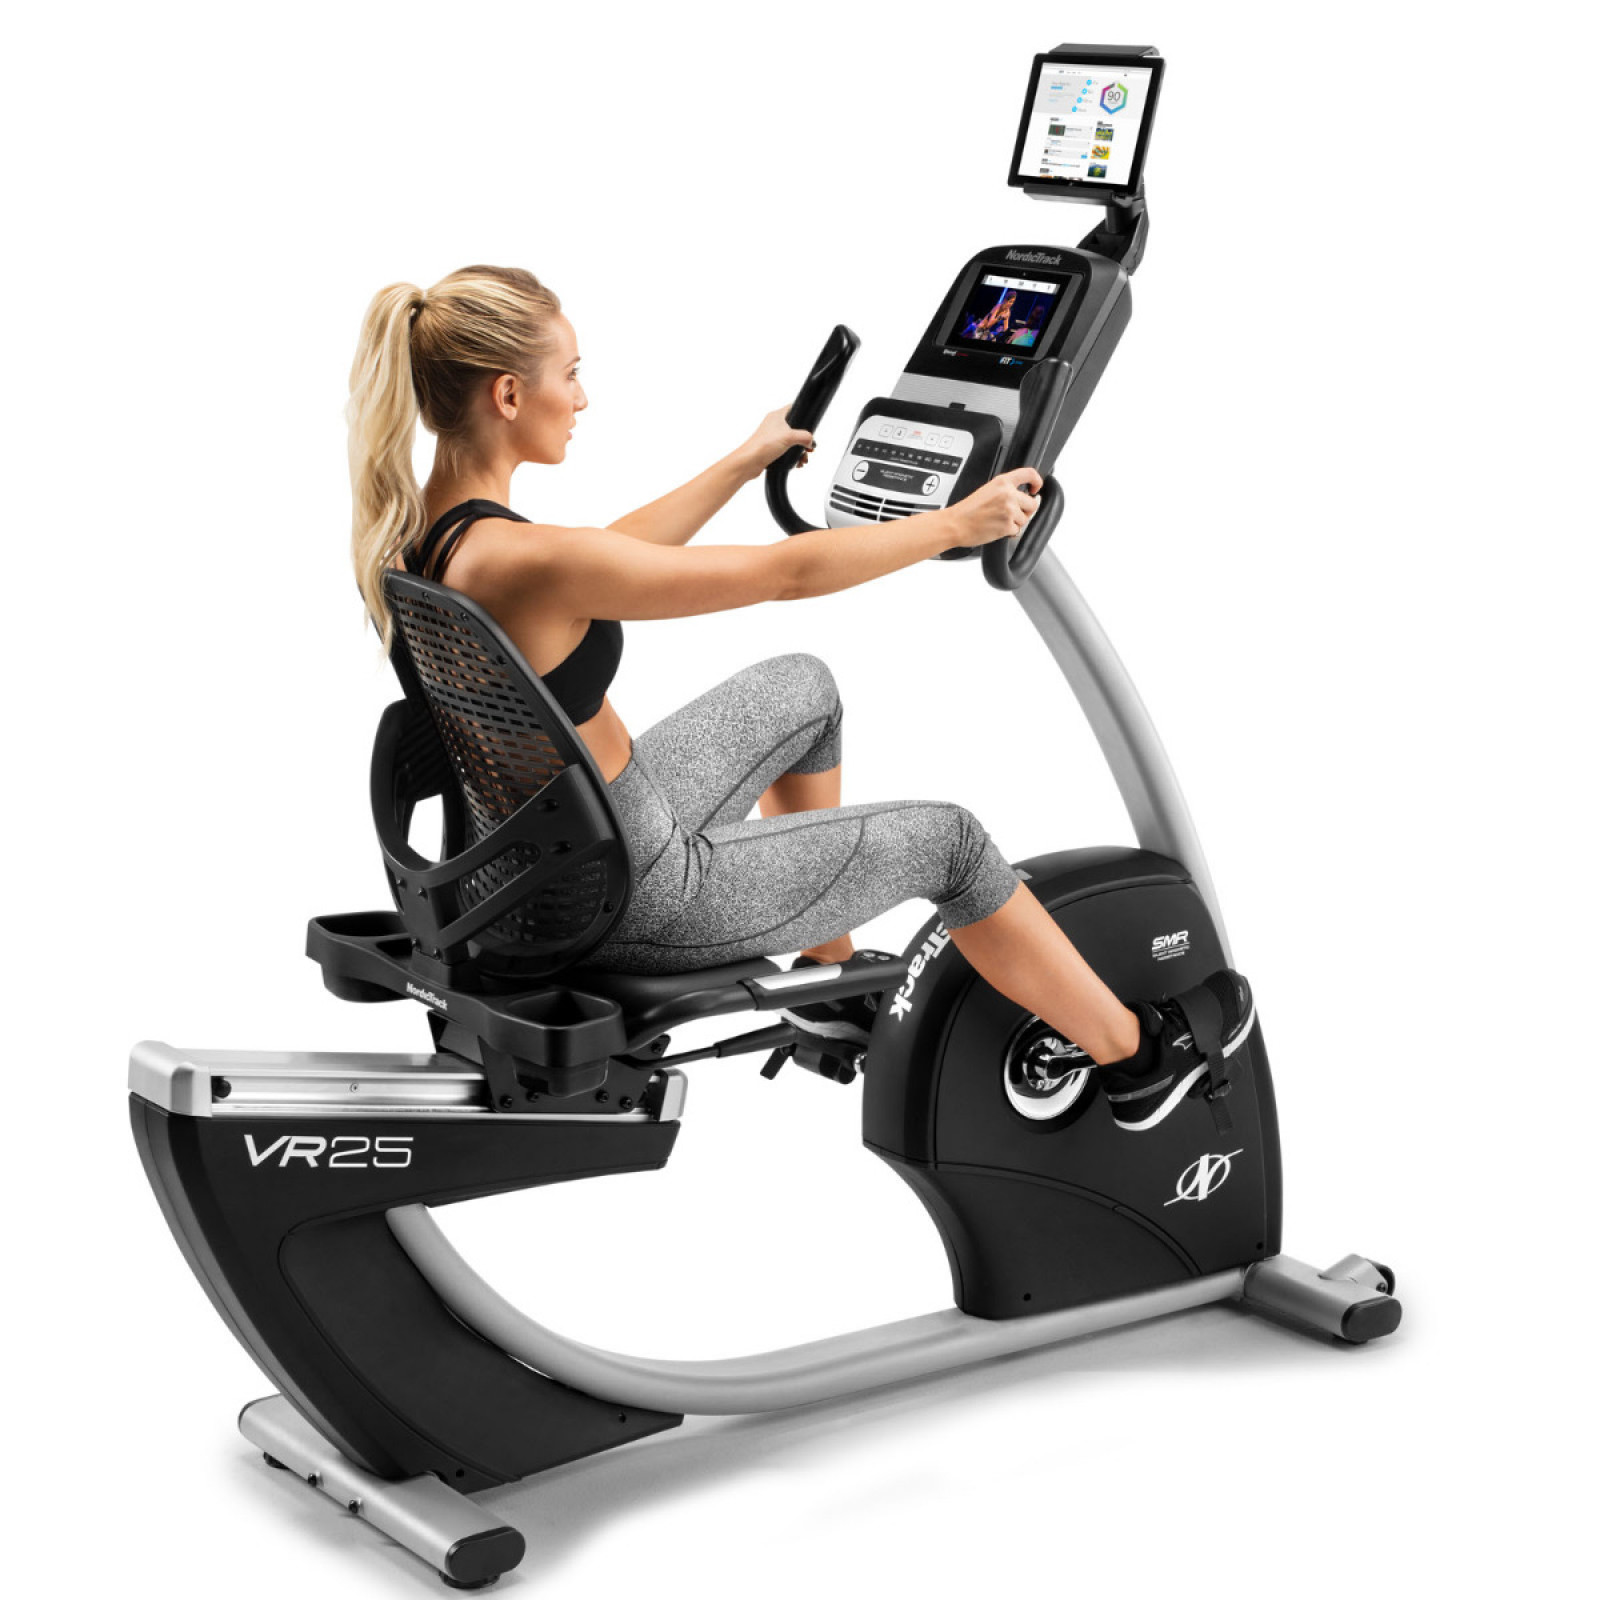 nordictrack exercise bike for sale